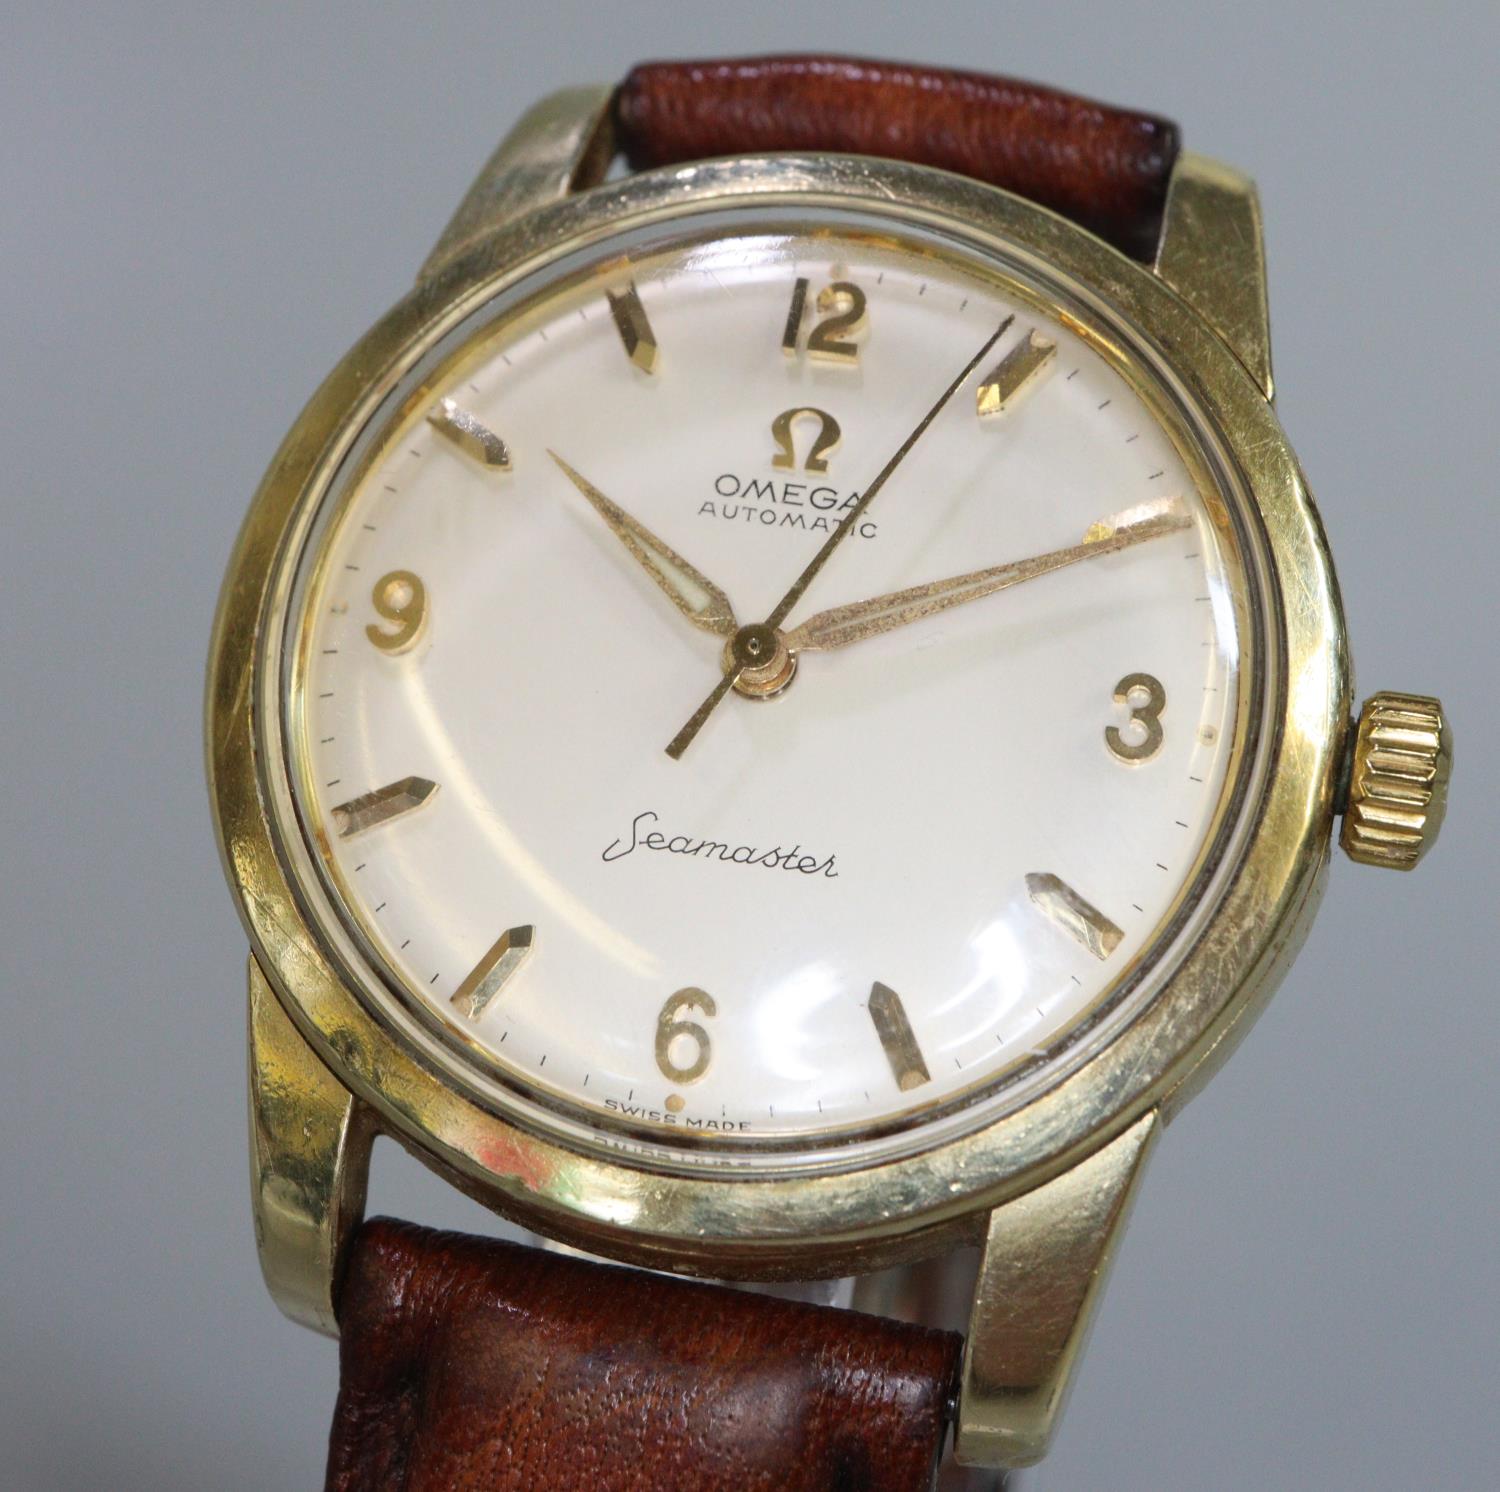 Omega Seamaster Automatic gold plated gents wristwatch with satin face and baton numerals. - Image 3 of 4